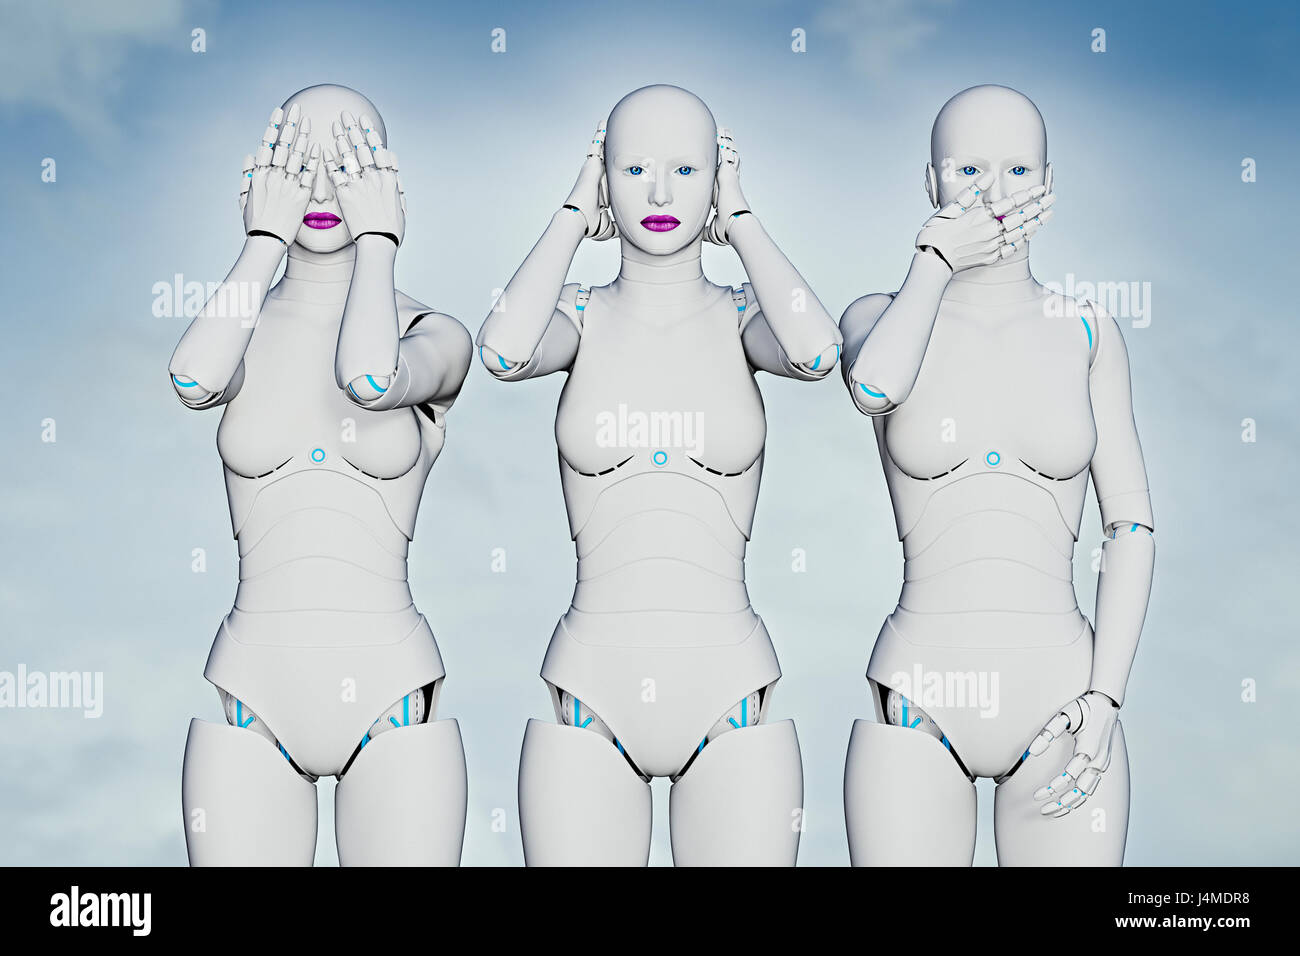 Woman robots covering eyes, ears and mouth Stock Photo